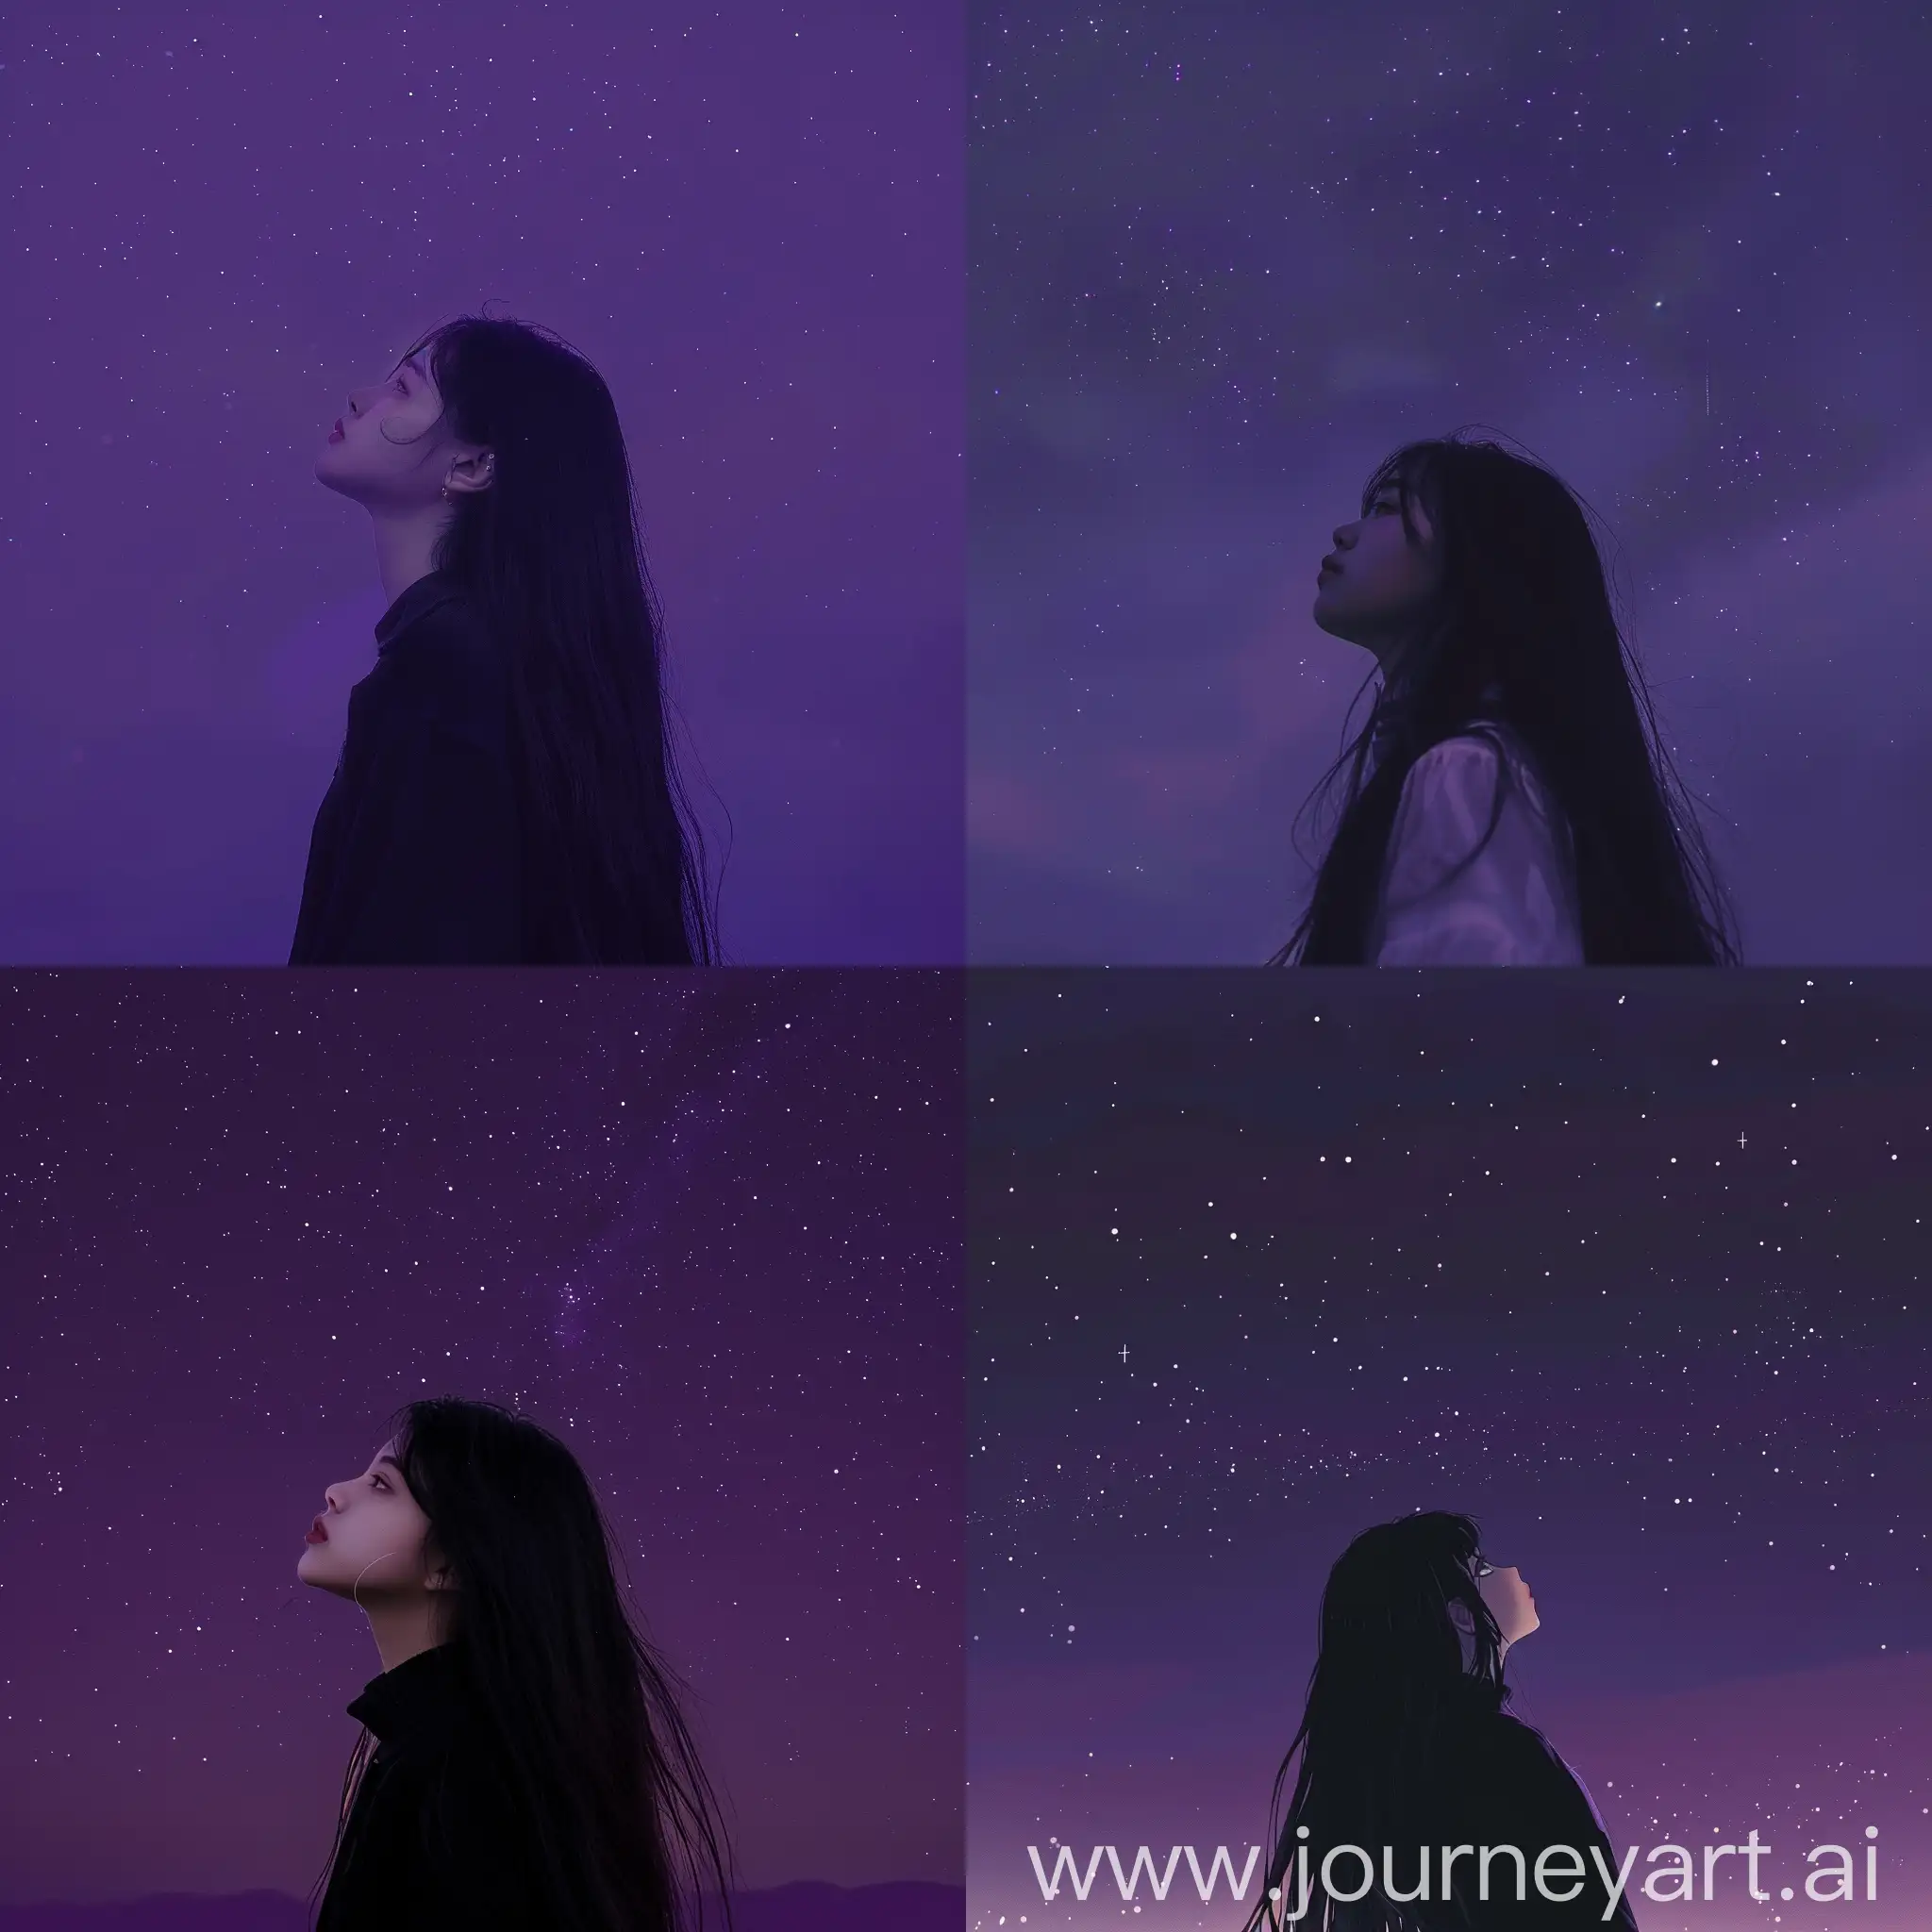 Aesthetic instagram picture, the sky at night, dark purple coloring, stars and no clouds, girl with long black hair facing away looking up, dynamic angle